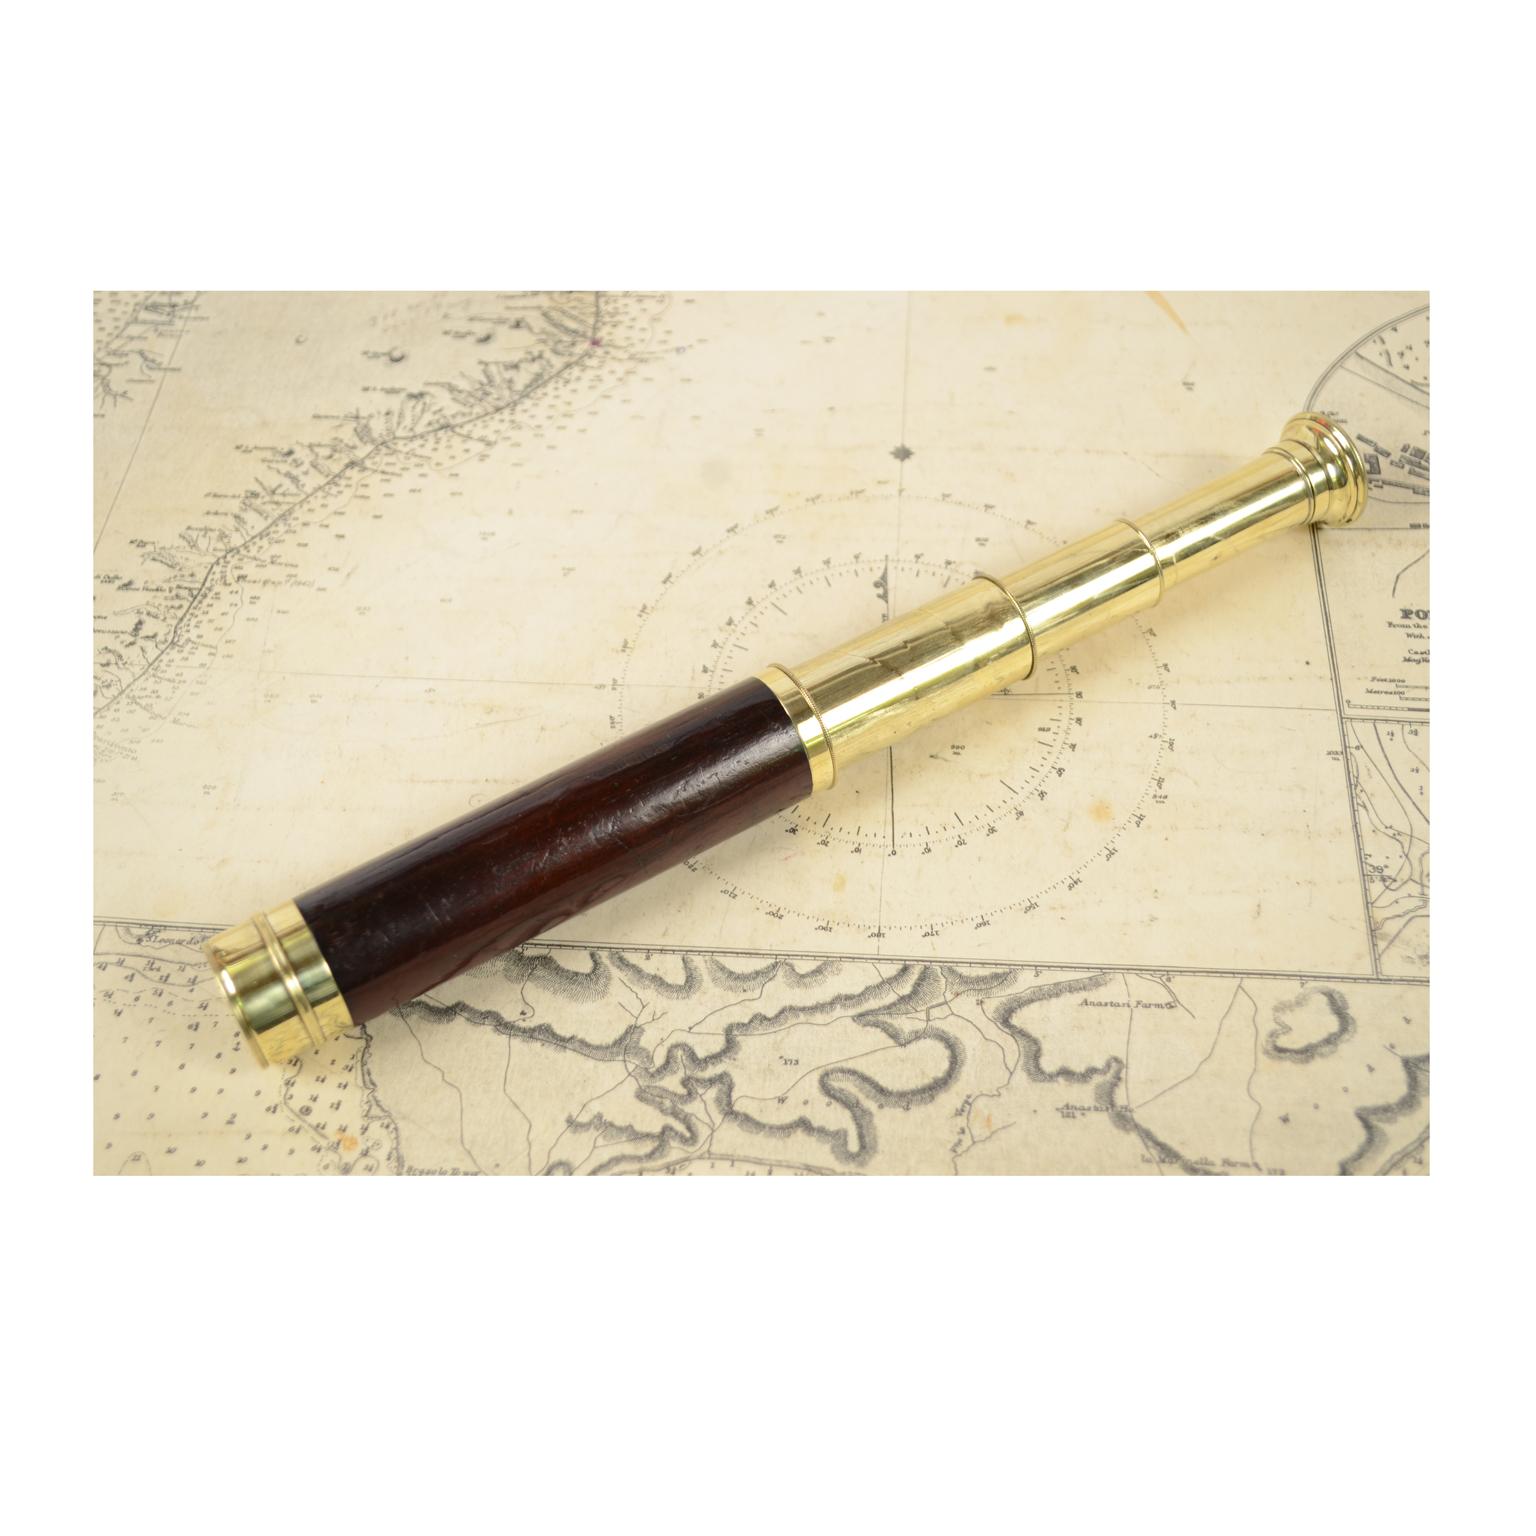 Brass telescope with mahogany handle, three extensions, mid-19th century English manufacture. Very good condition, maximum length 39 cm, minimum 15, focal diameter 2.5 cm. Complete with wooden and brass base.
  